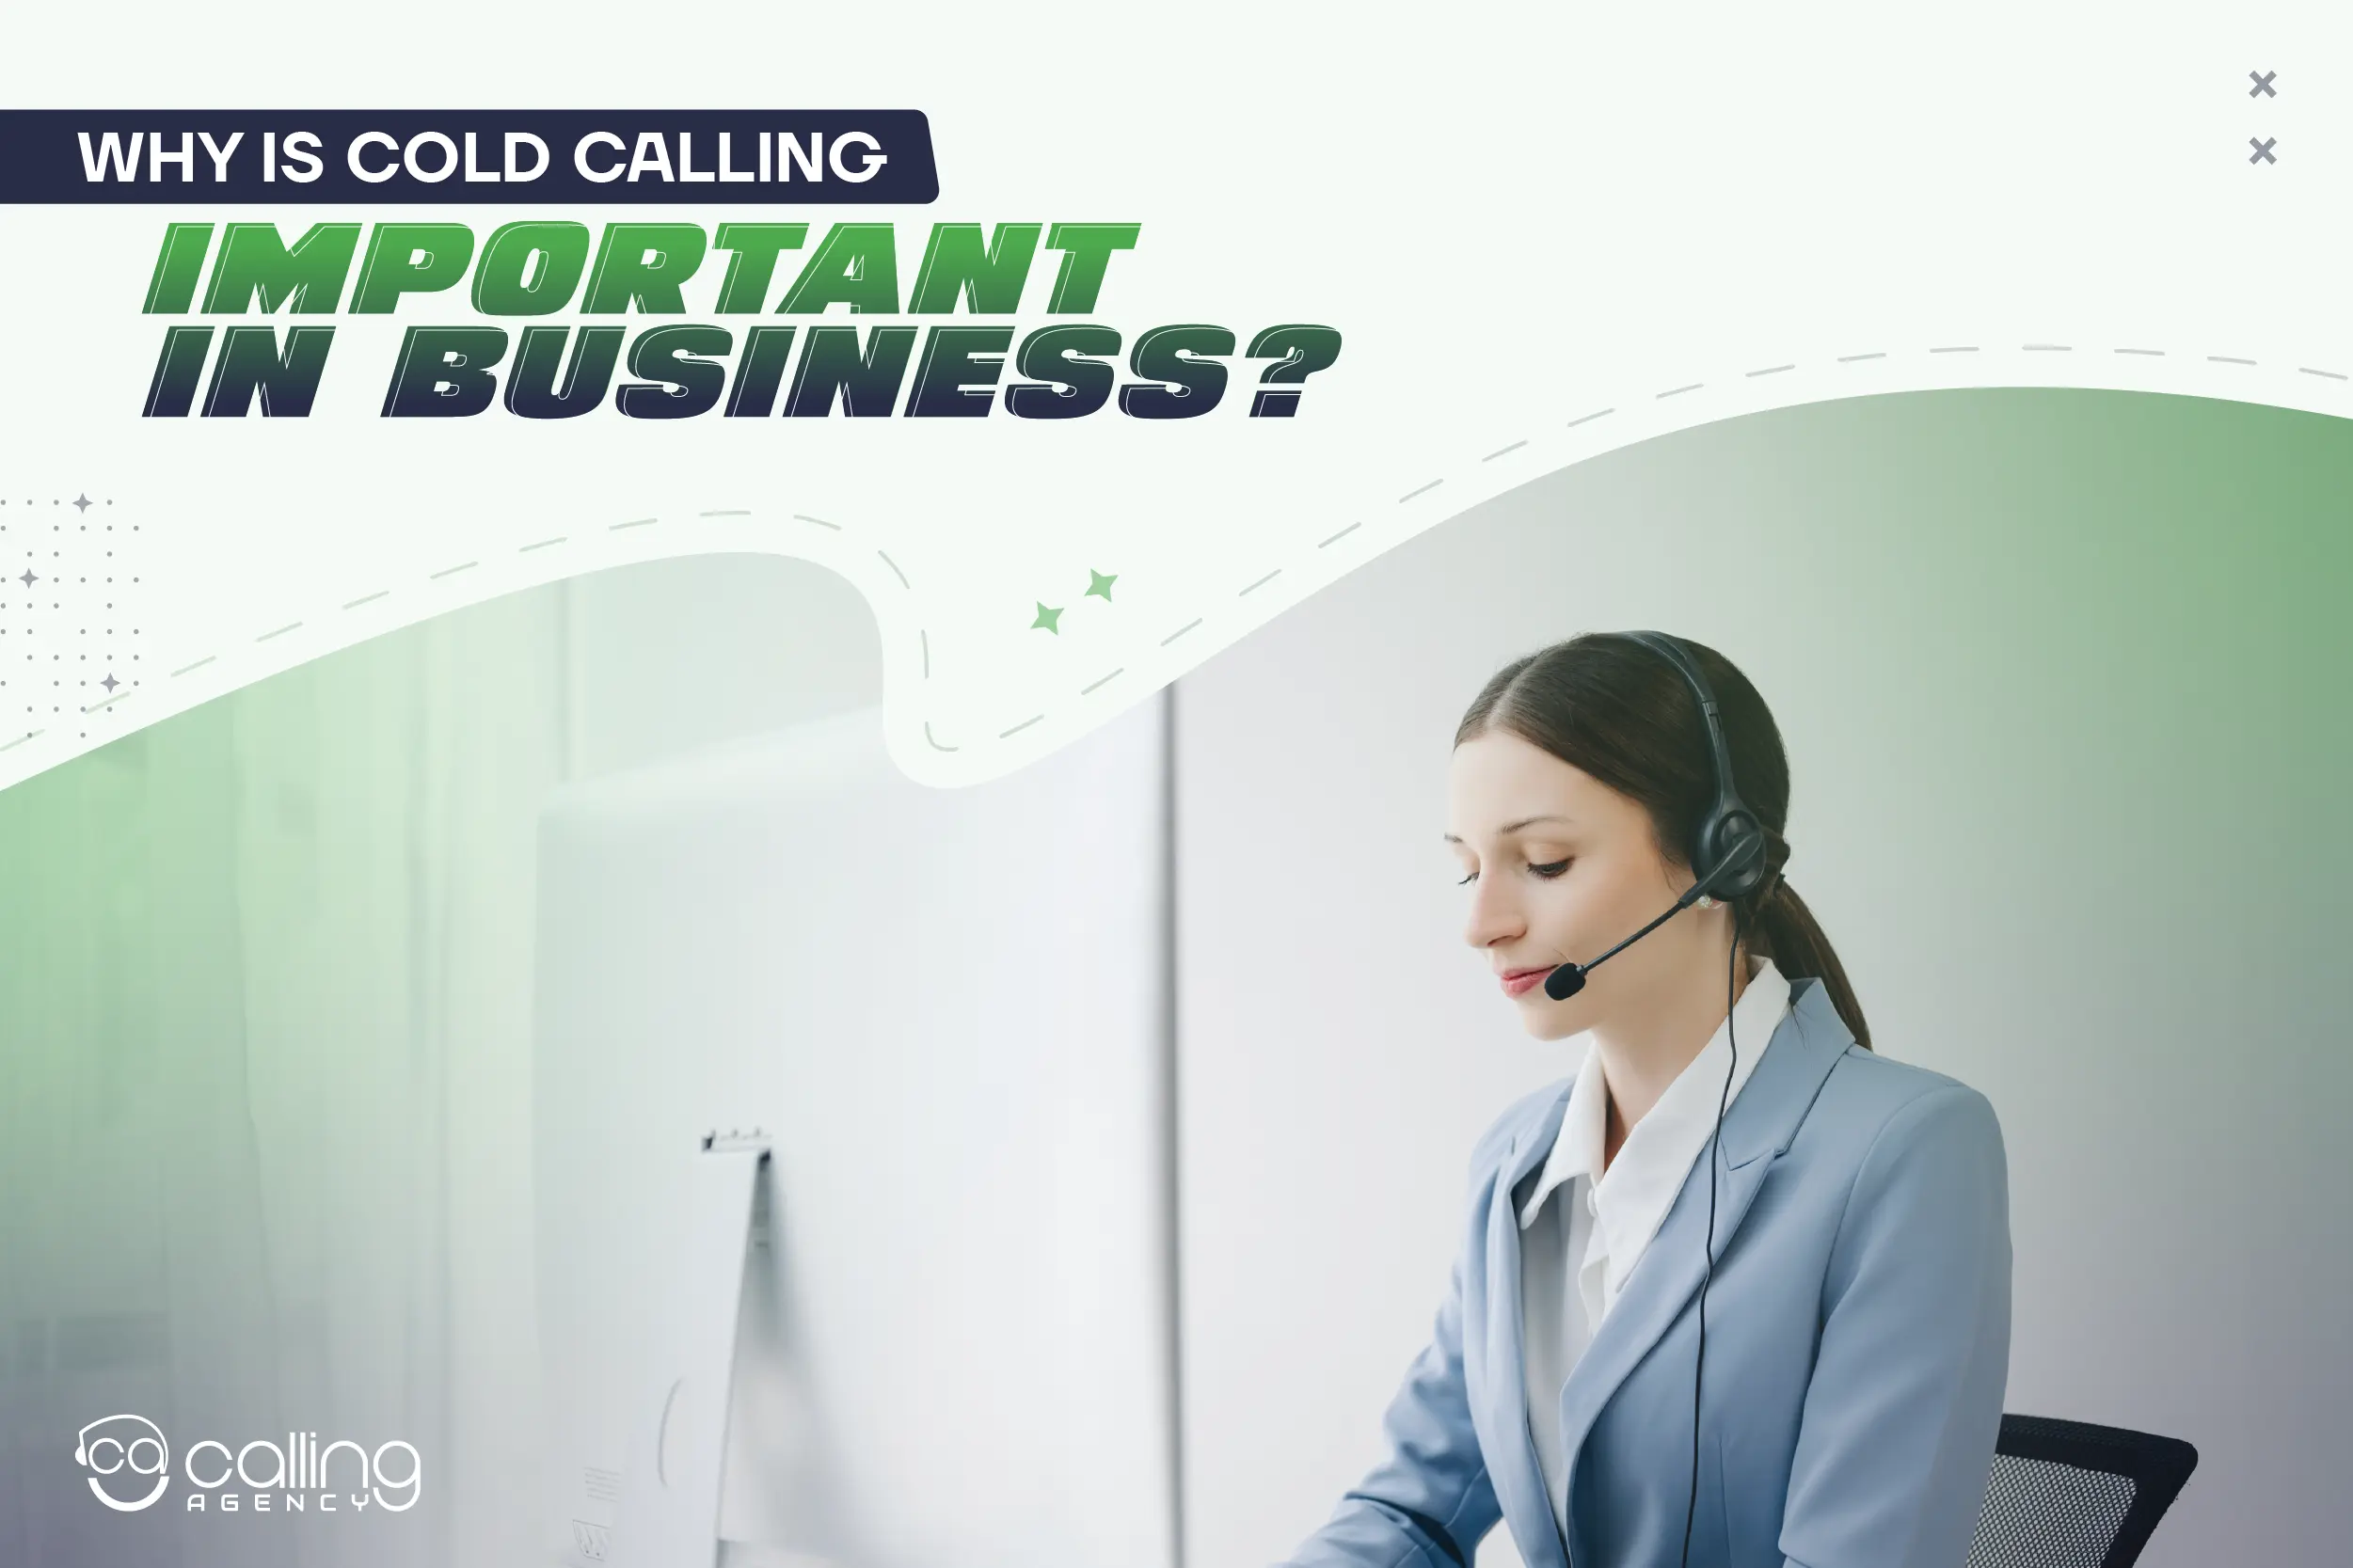 Why Is Cold Calling Important in Business?